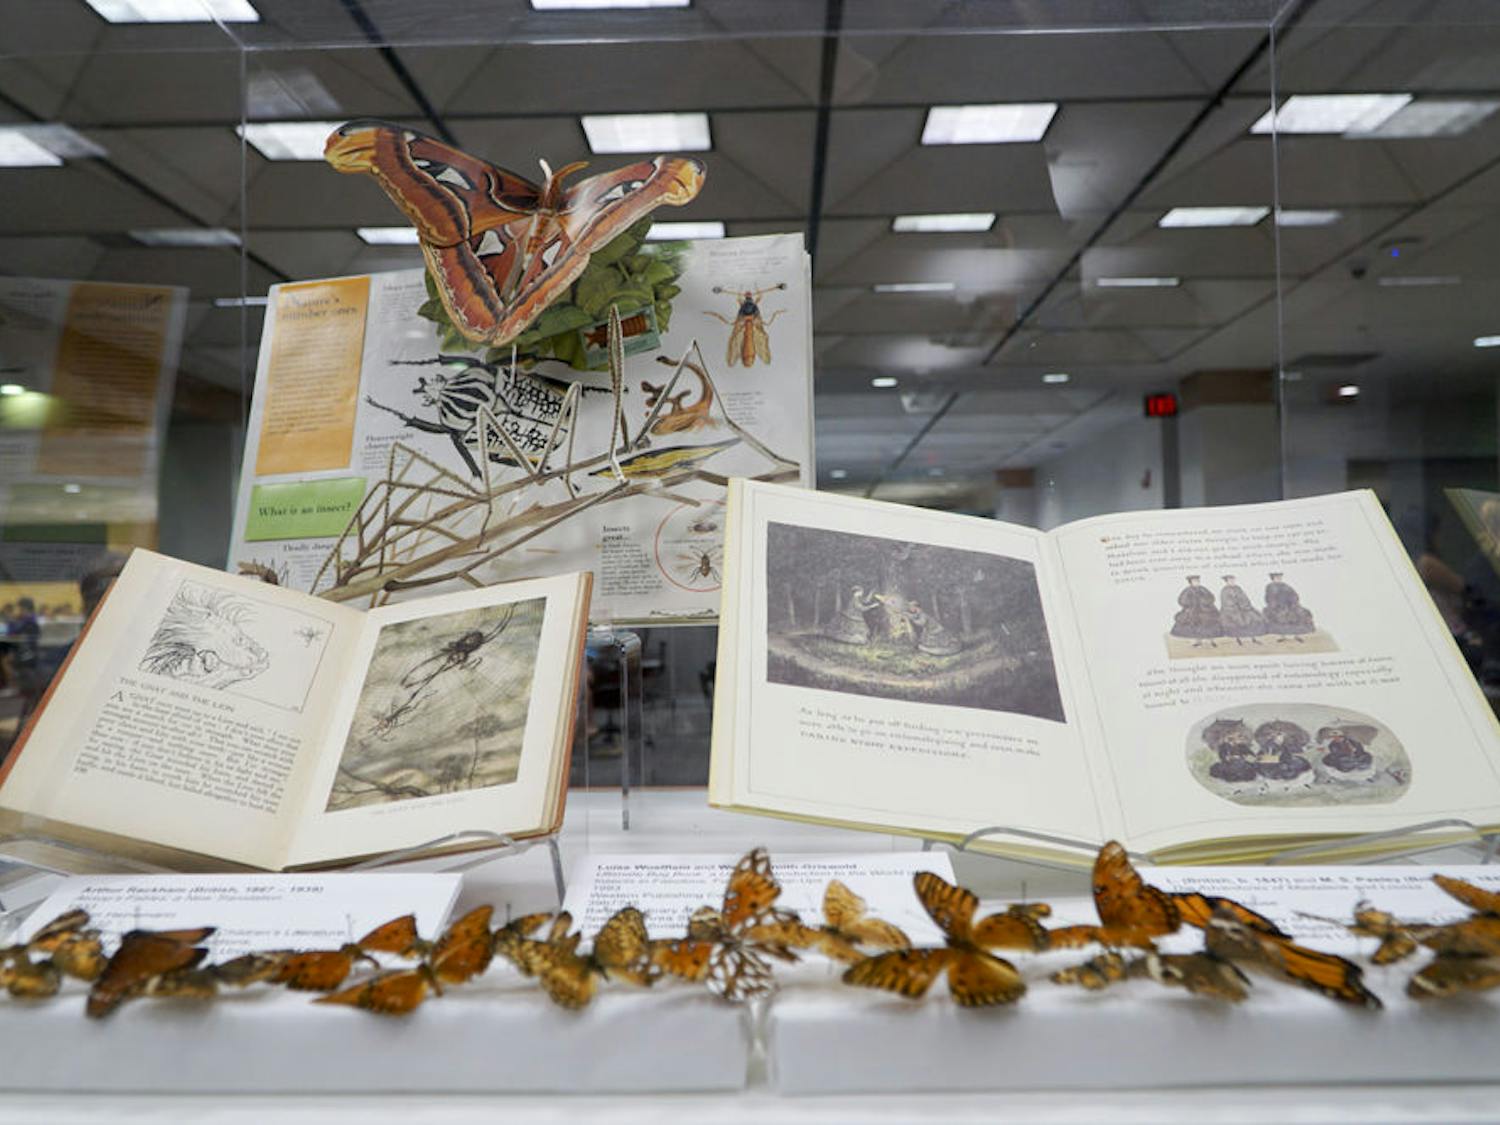 A collection of Aesop’s Fables lays open to the fable of the gnat and the lion inside Marston Science Library as part of a campus-wide exhibit titled “Capturing Nature: The Insect World in Art.” The exhibit shows how insects are important to different areas of study, including calligraphy, children’s literature and jewelry.